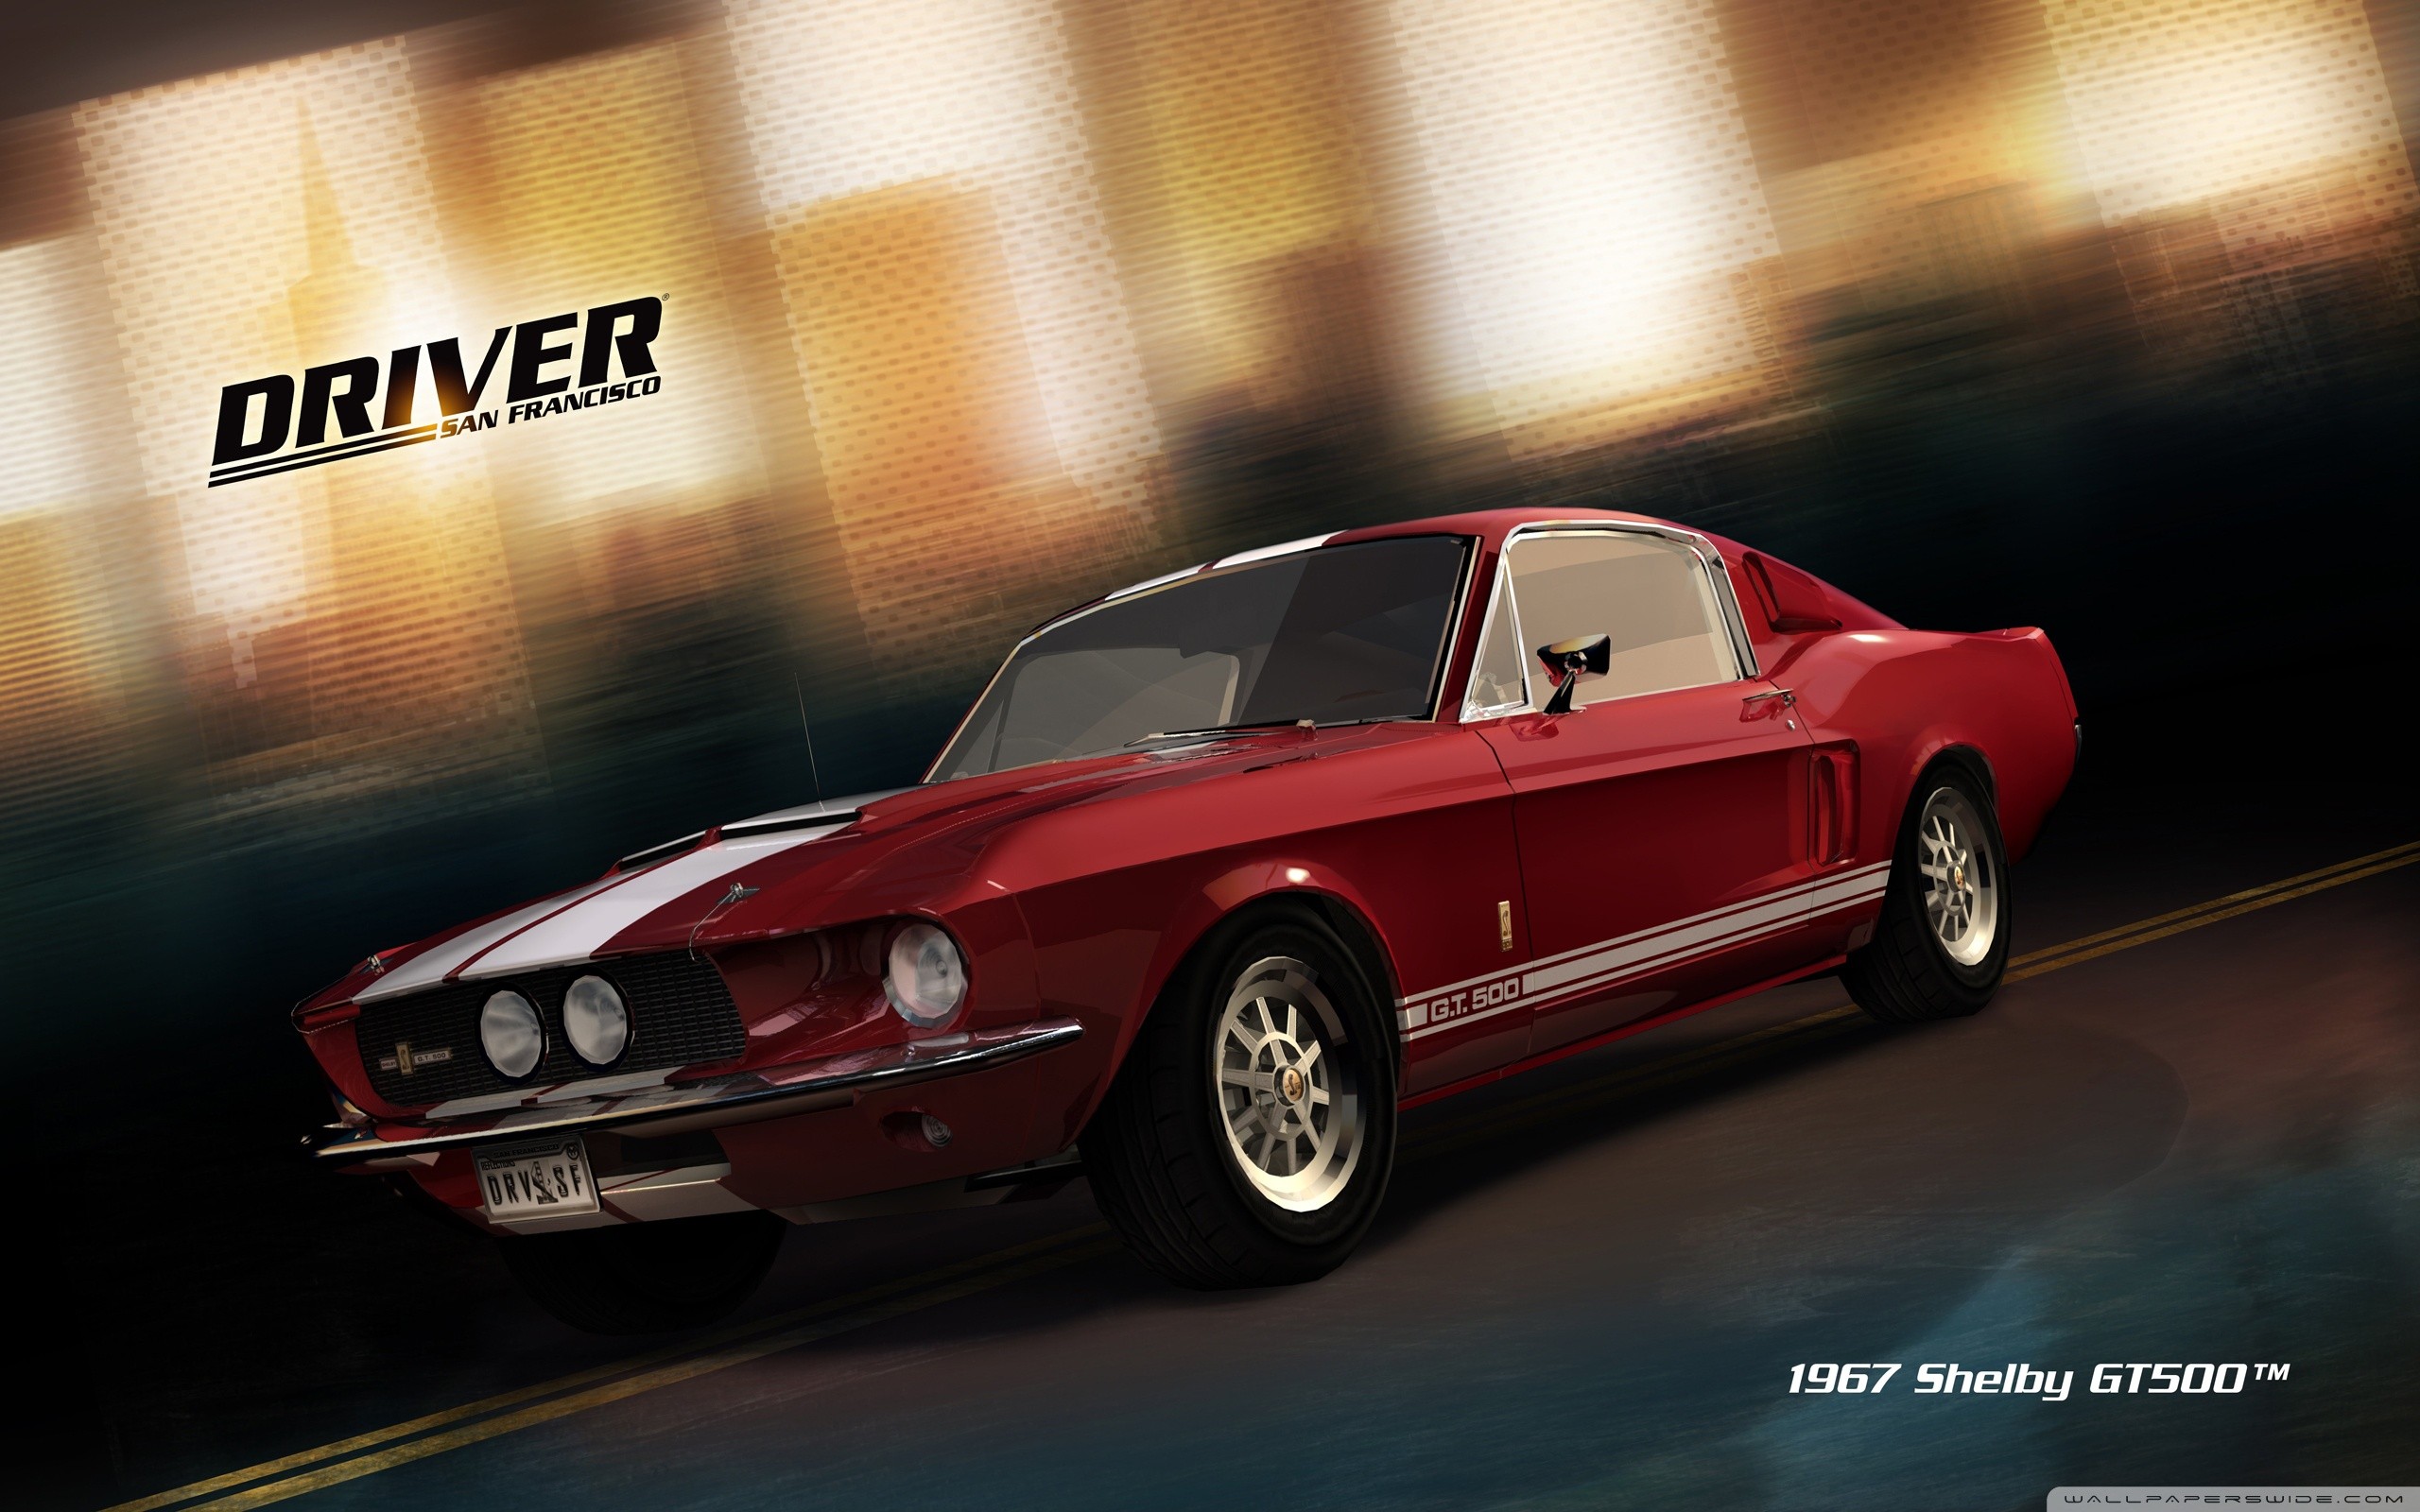 video, Games, San, Francisco, Driver, Shelby, Gt500 Wallpaper